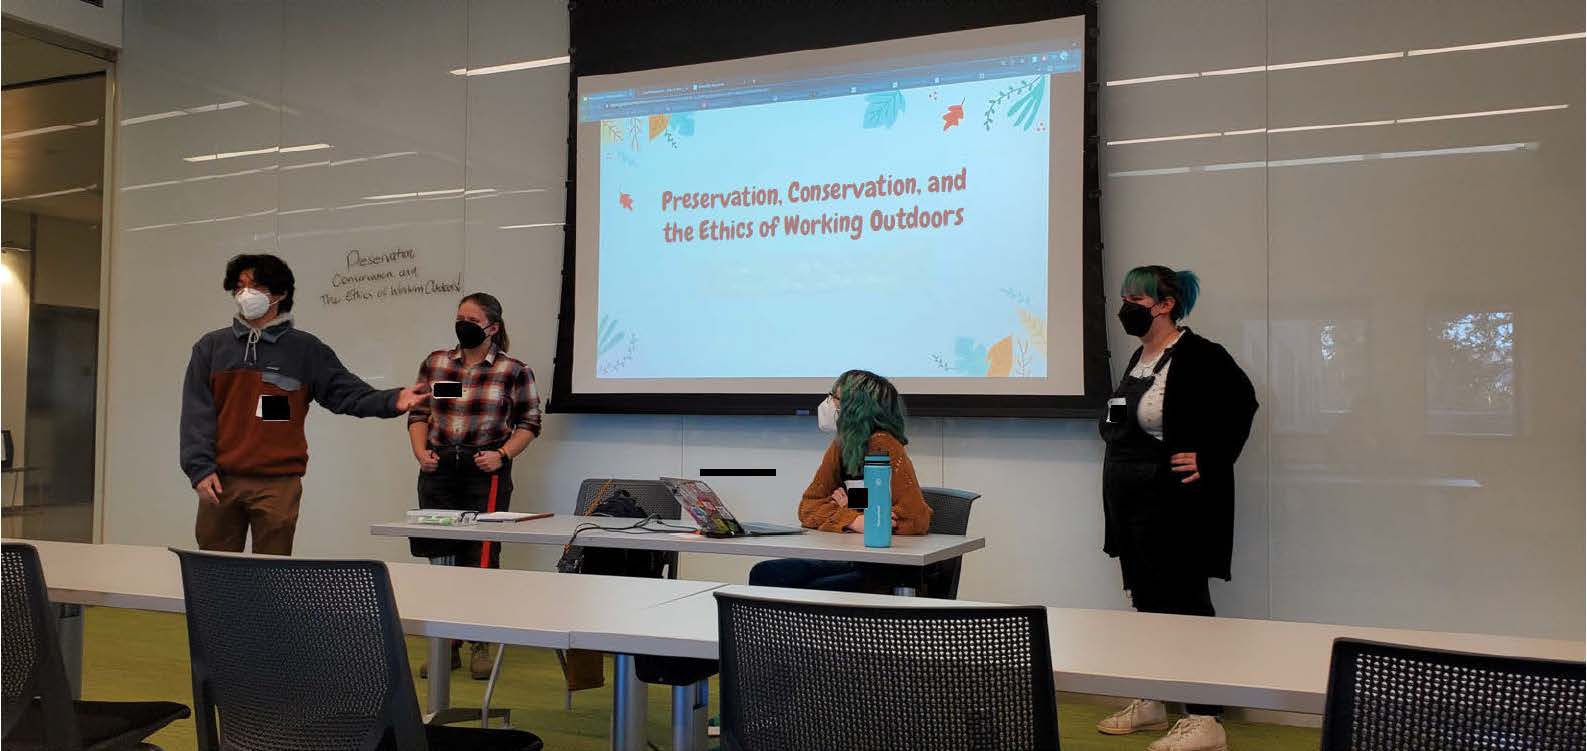 Presentation from Environmental Leaders ARC on &quot;Preservation, Conservation, and the Ethics of Working Outdoors.&quot;